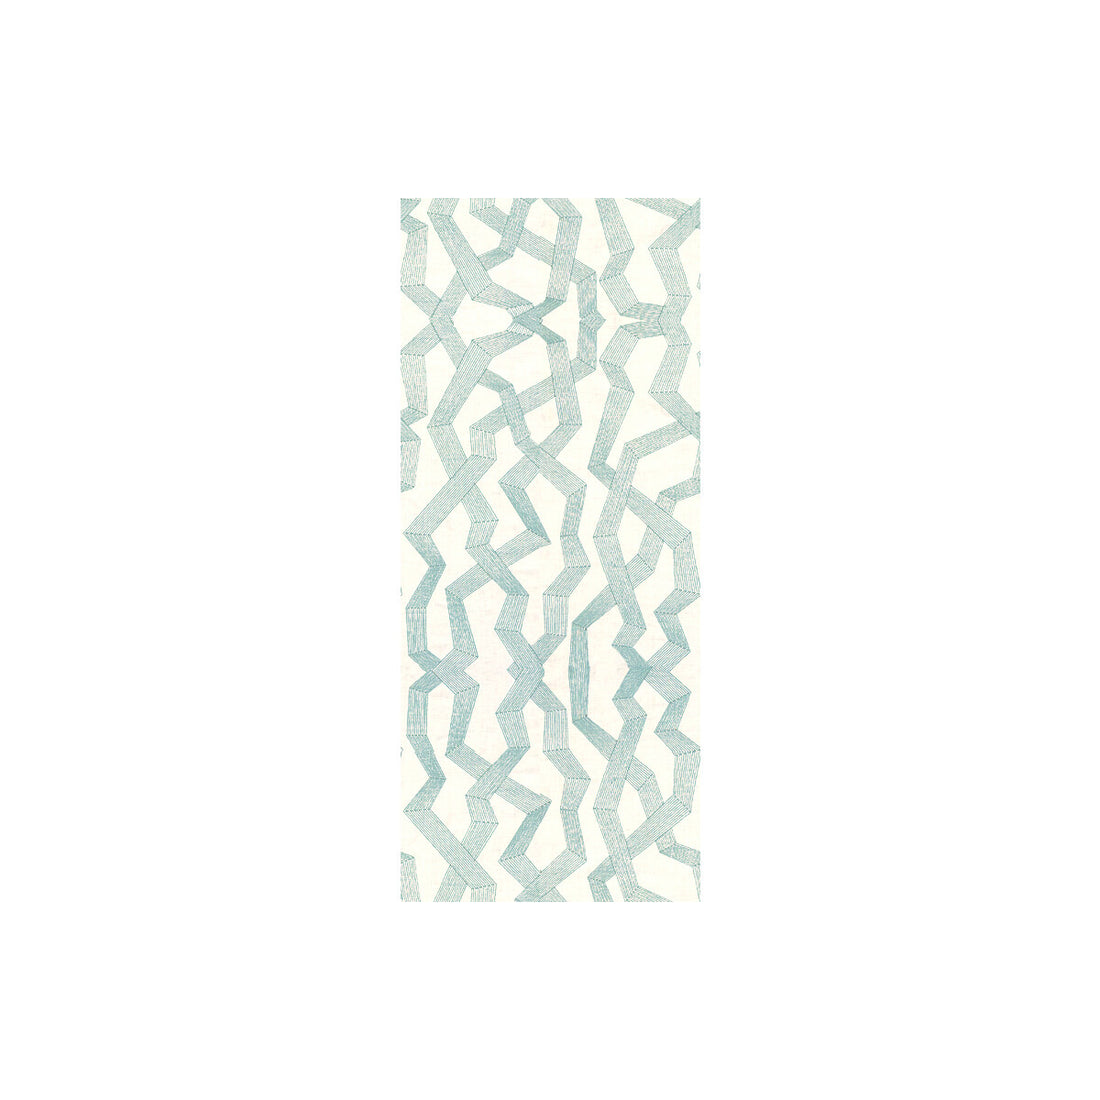 Soto fabric in bayside color - pattern 3949.15.0 - by Kravet Basics in the Jeffrey Alan Marks collection